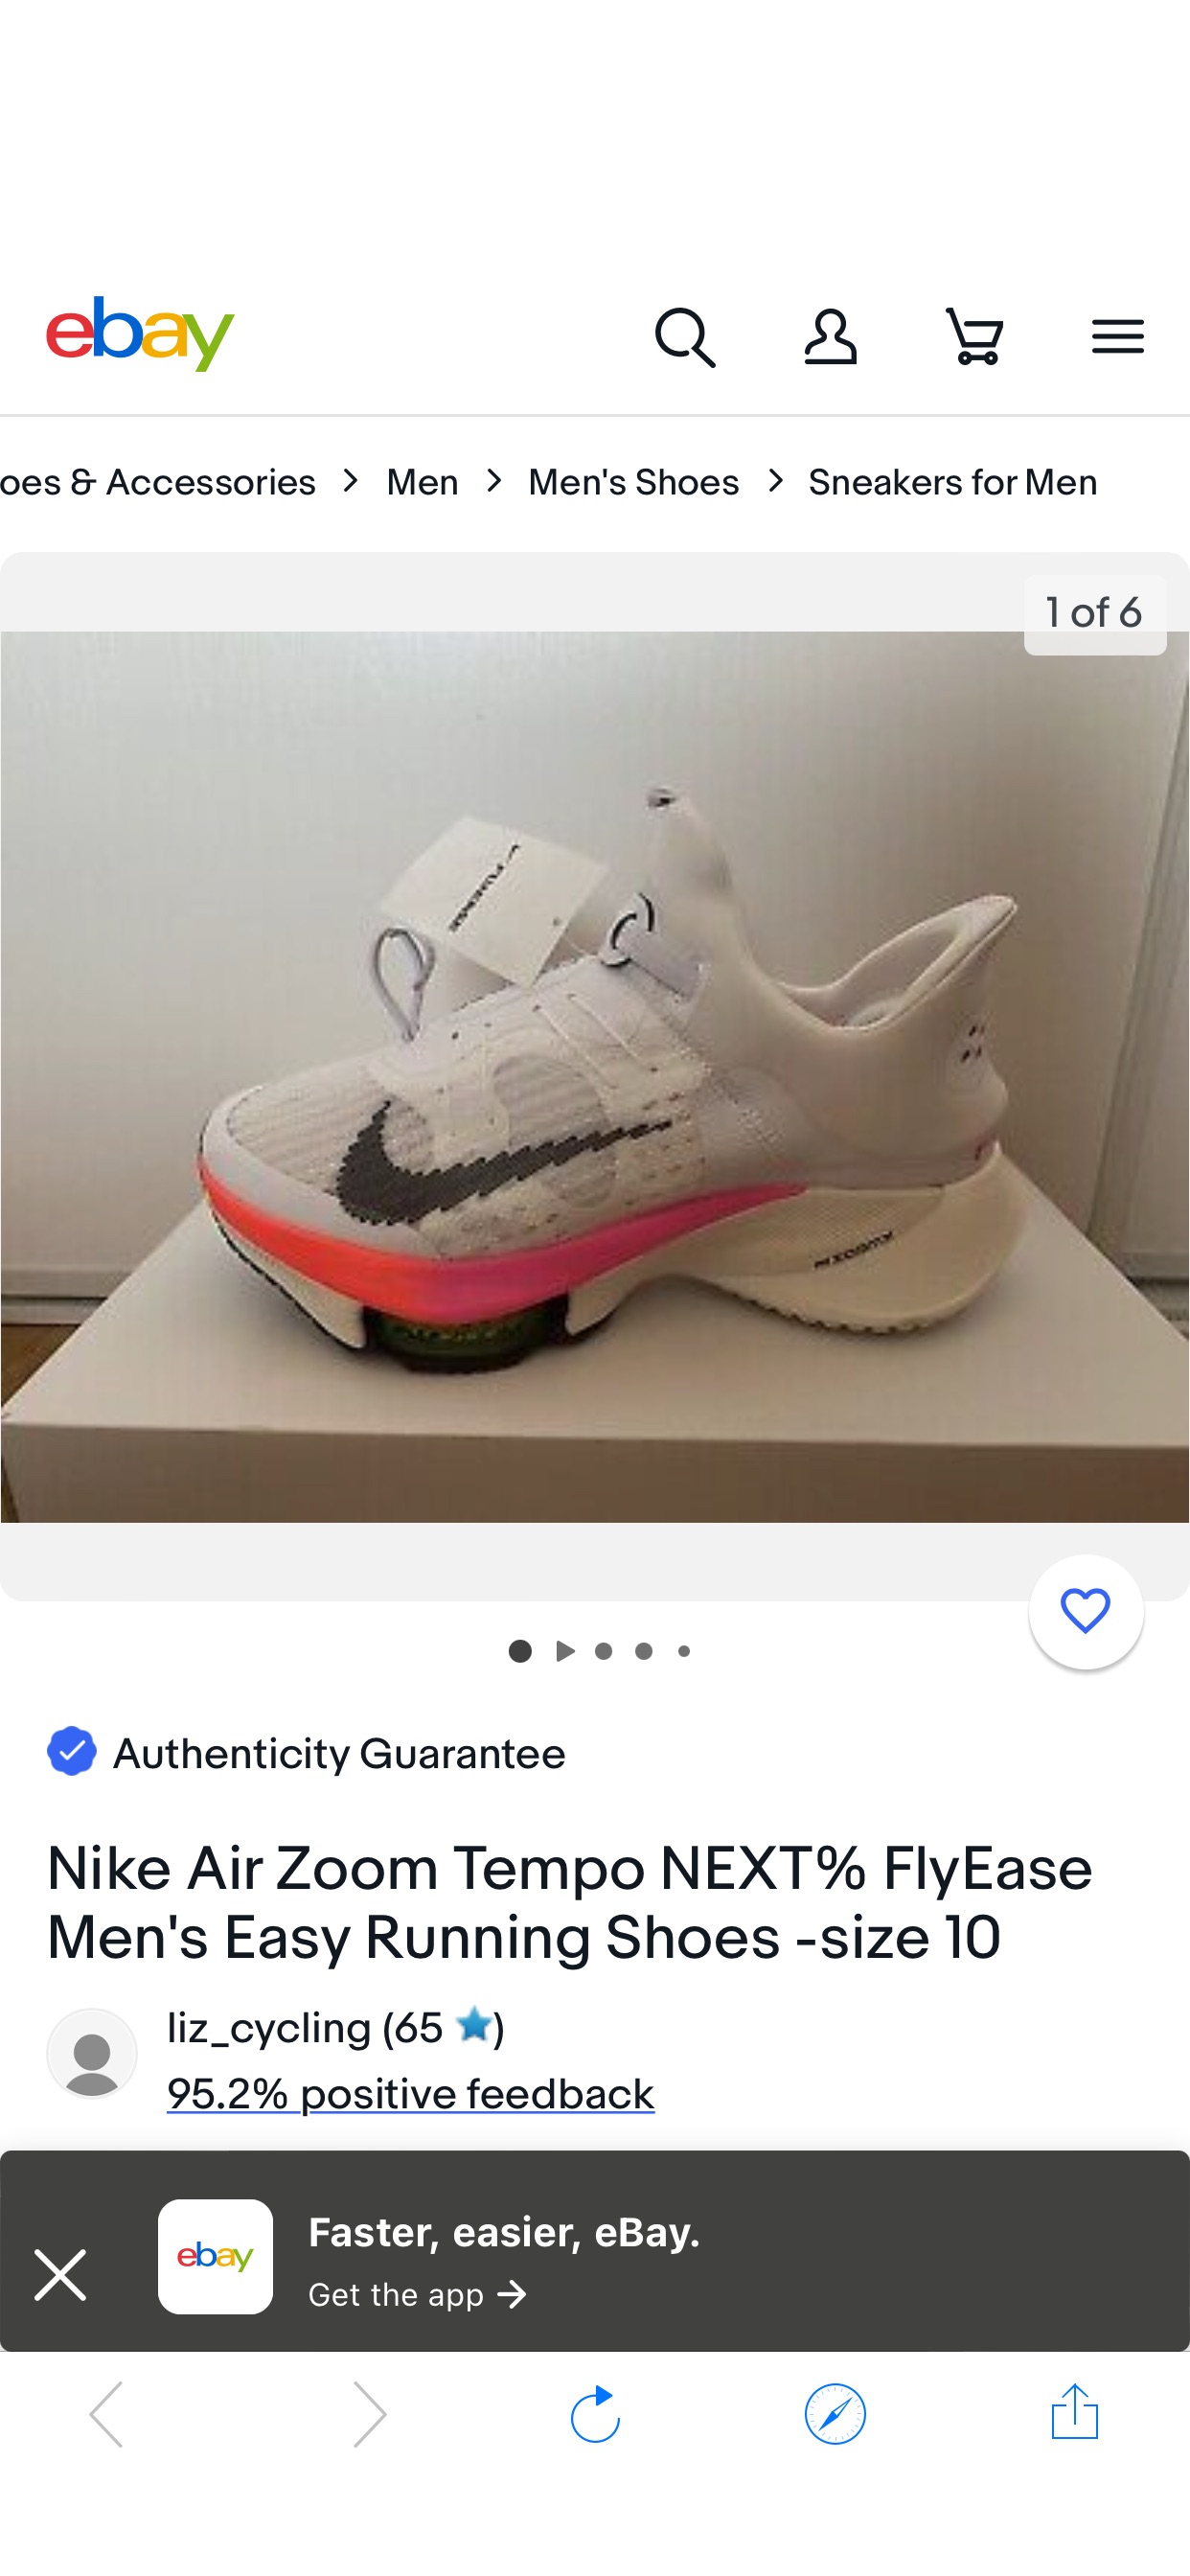 Nike Air Zoom Tempo NEXT% FlyEase Men's Easy Running Shoes -size 10 | eBay